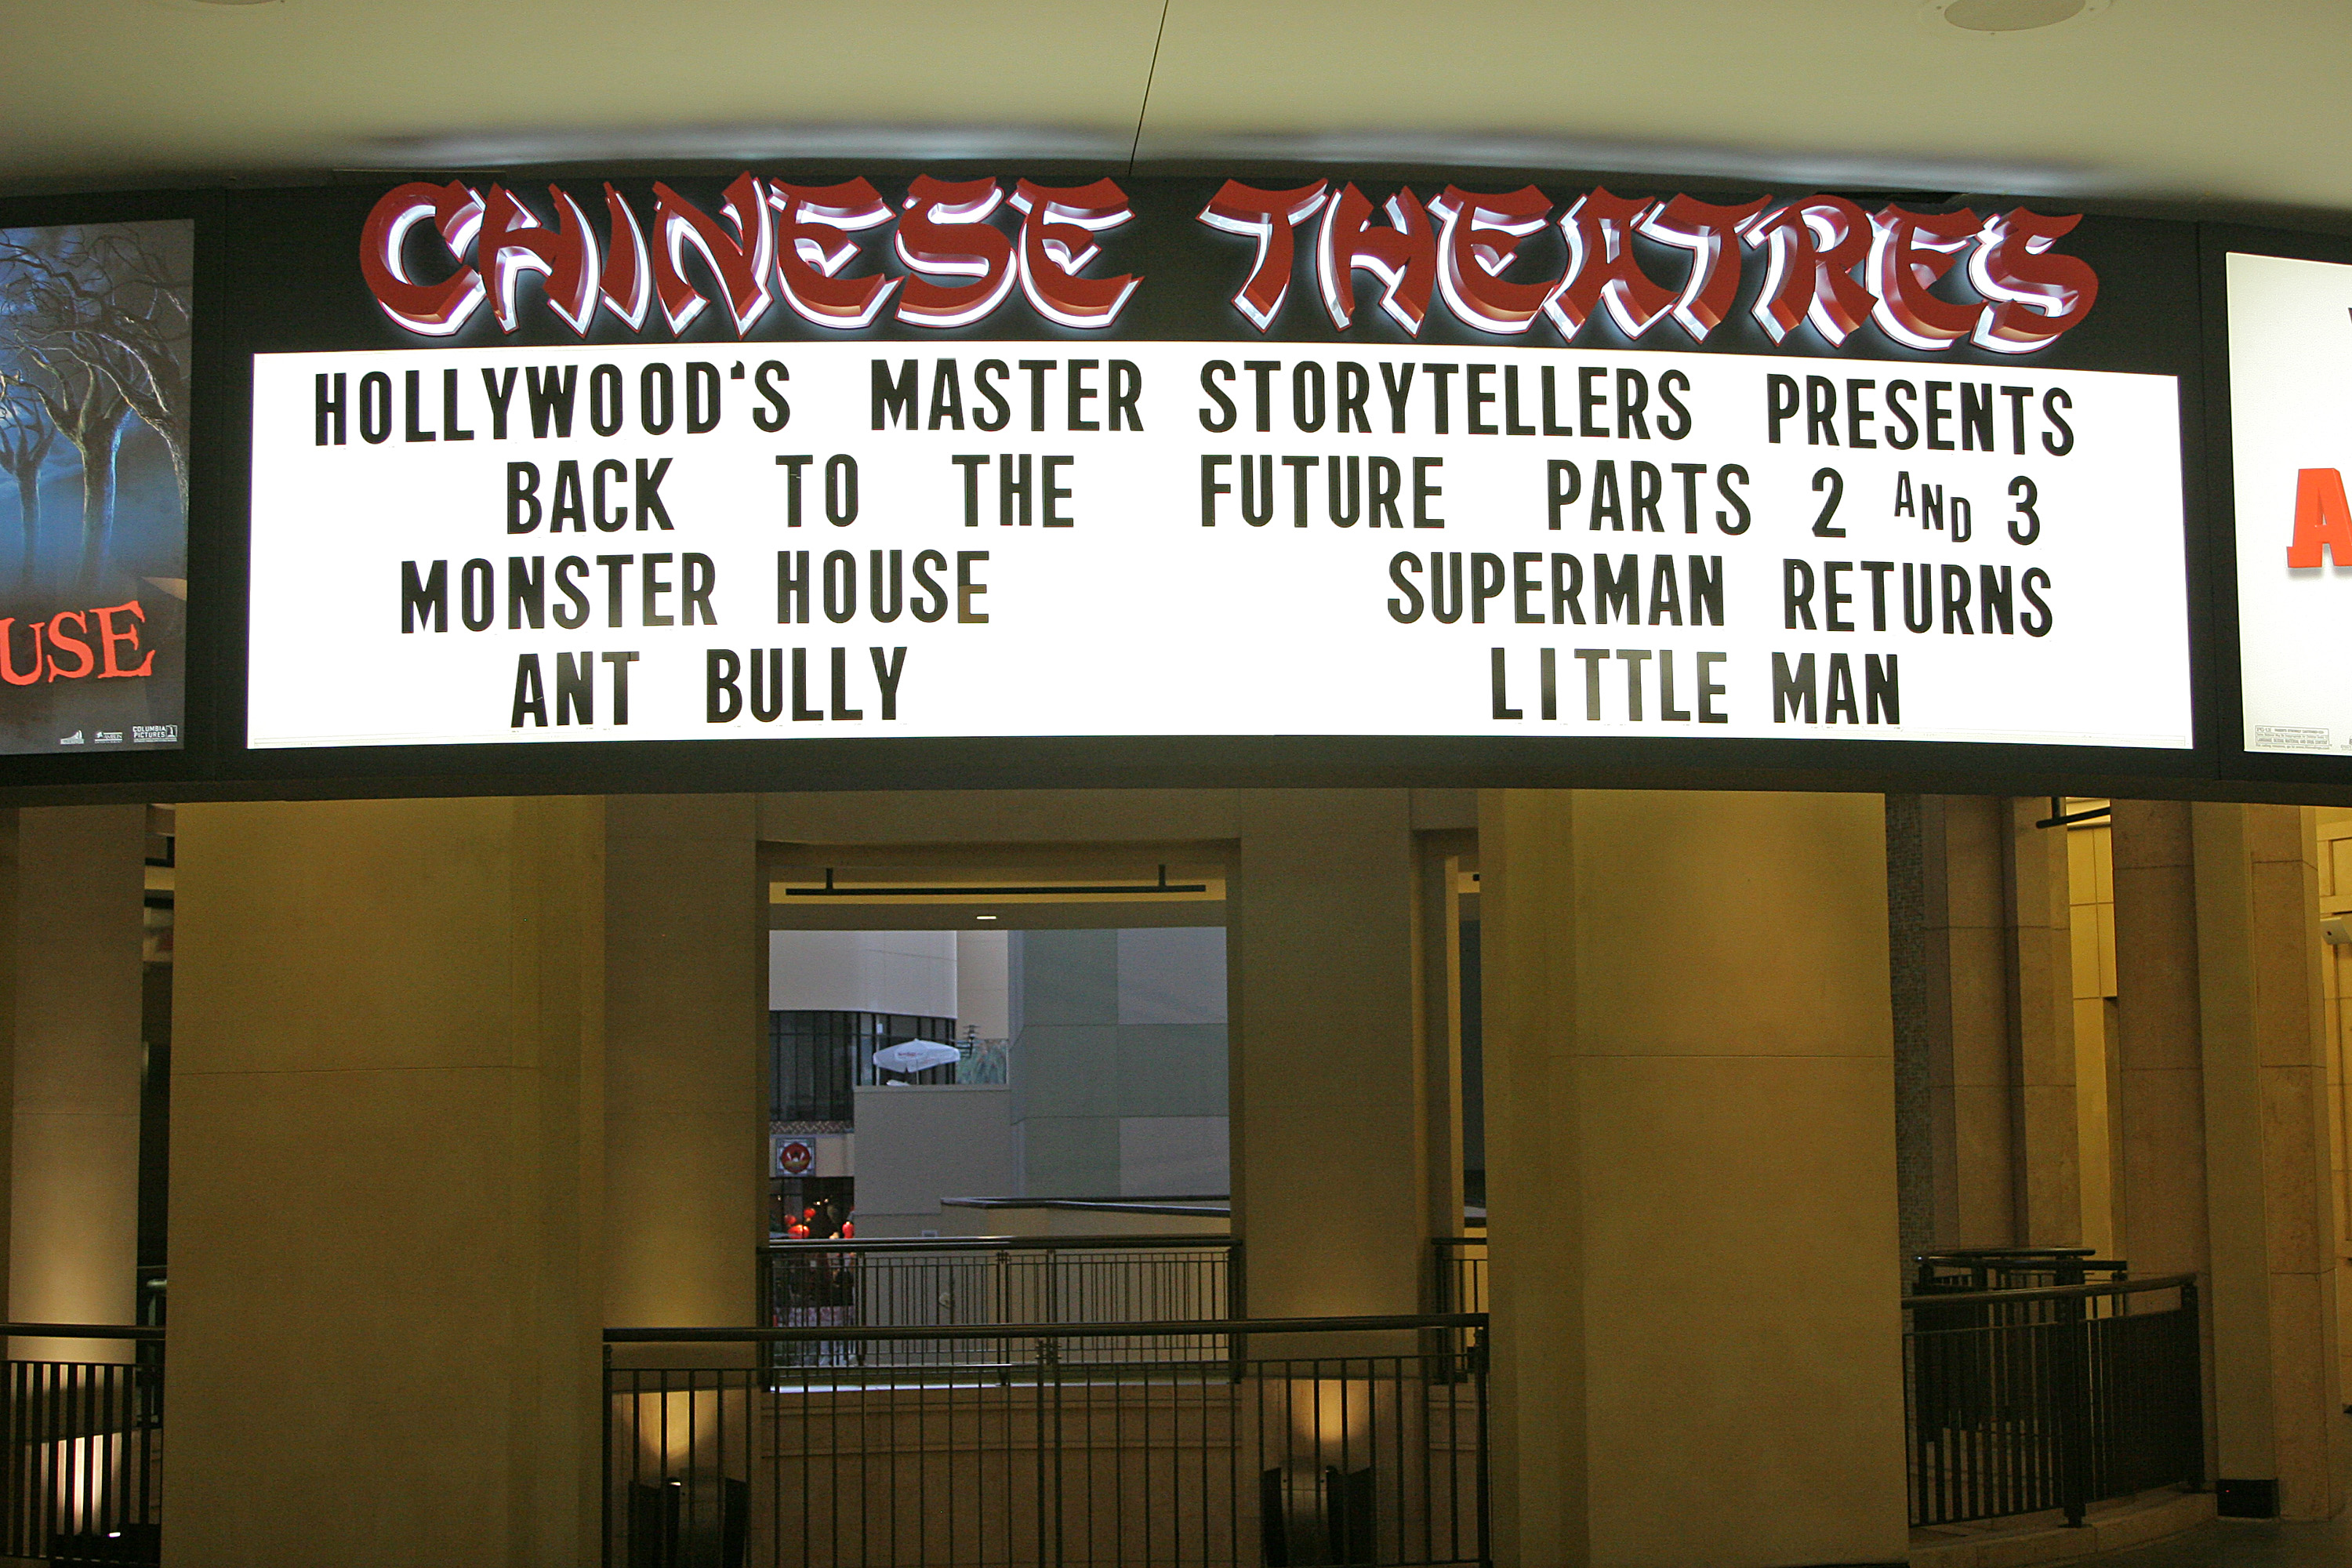 Hollywood's Master Storytellers live at Mann's Chinese Theater in Hollywood, CA.